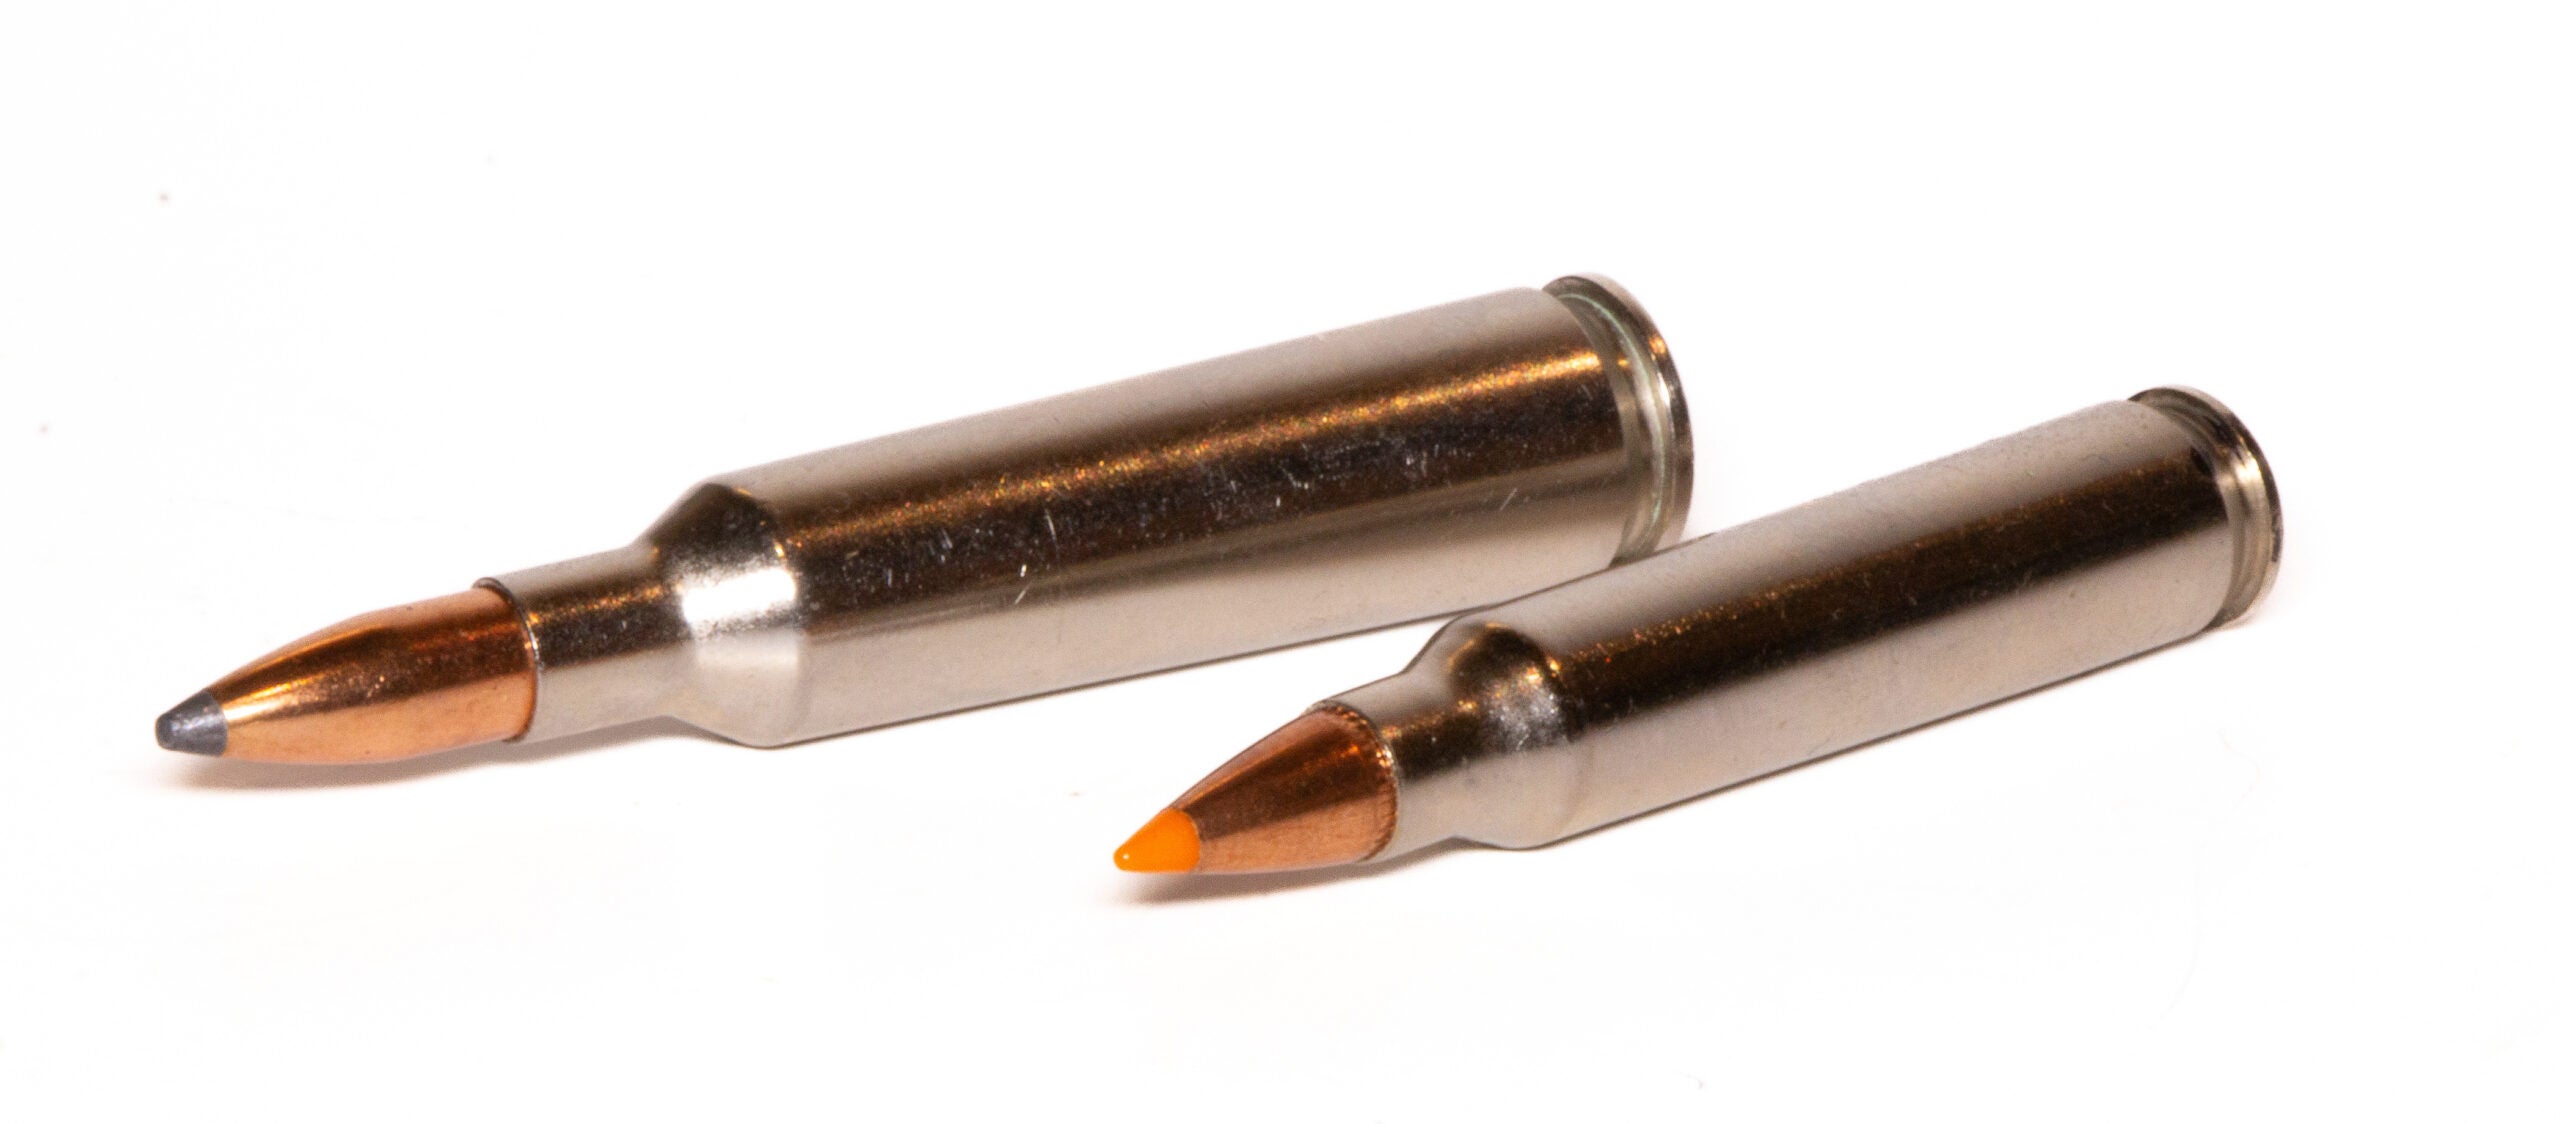 22-250 cartridge on left and 223 cartridge on right, both on a white background